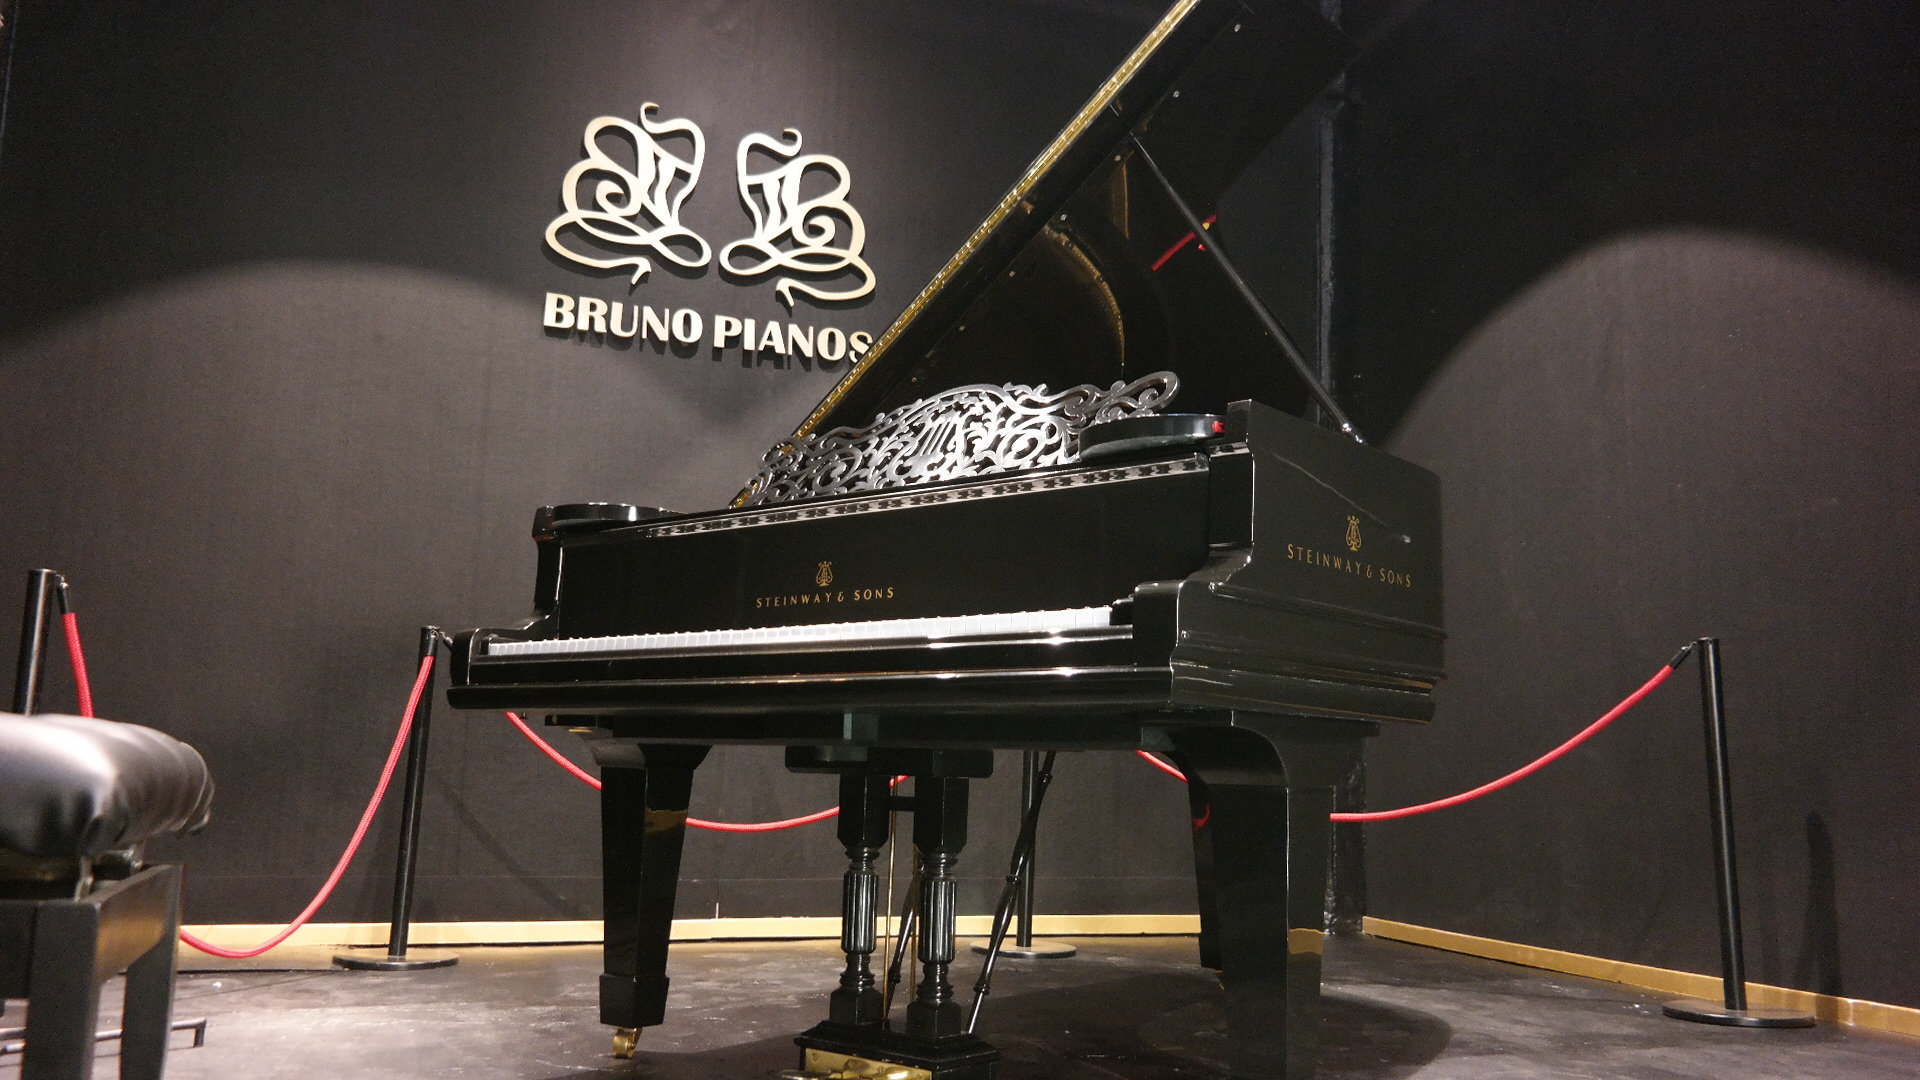 Piano Steinway Sons